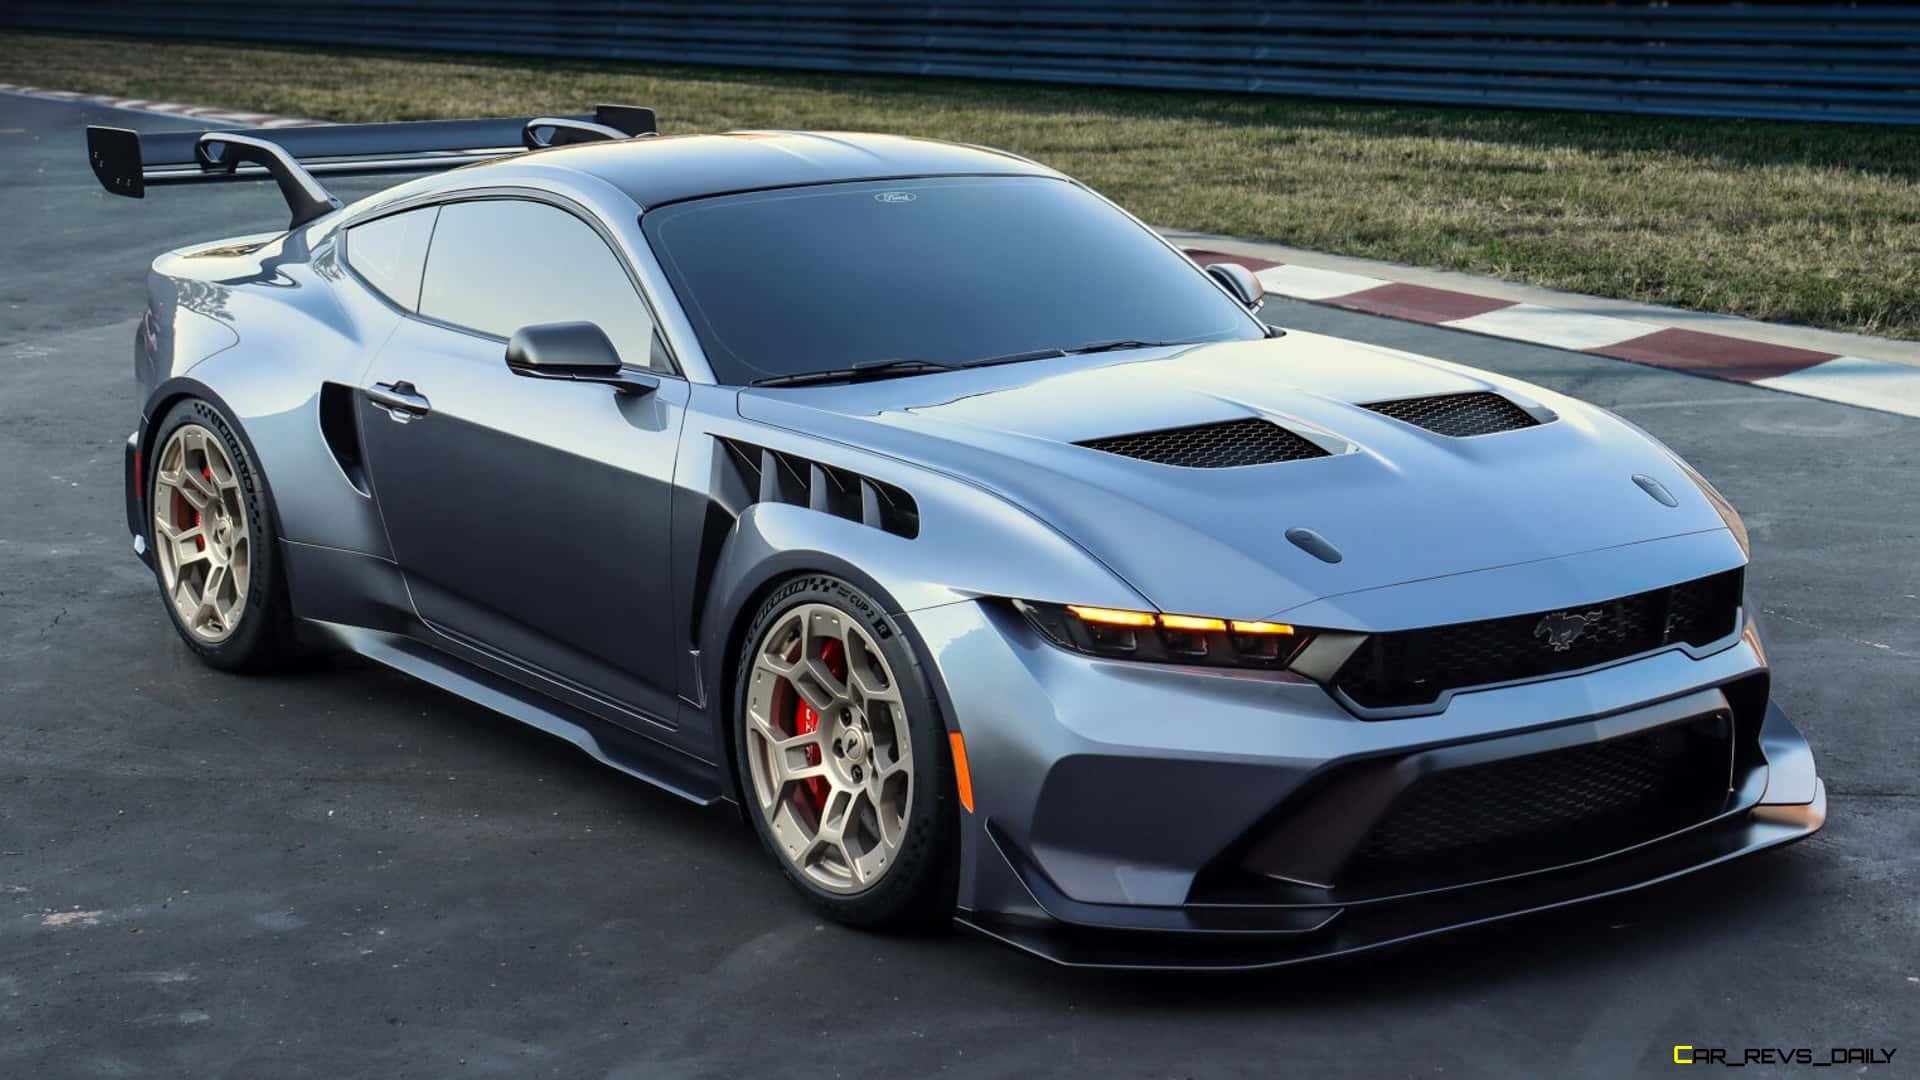 Need For Speed Film To Star 900-Horsepower Mustang